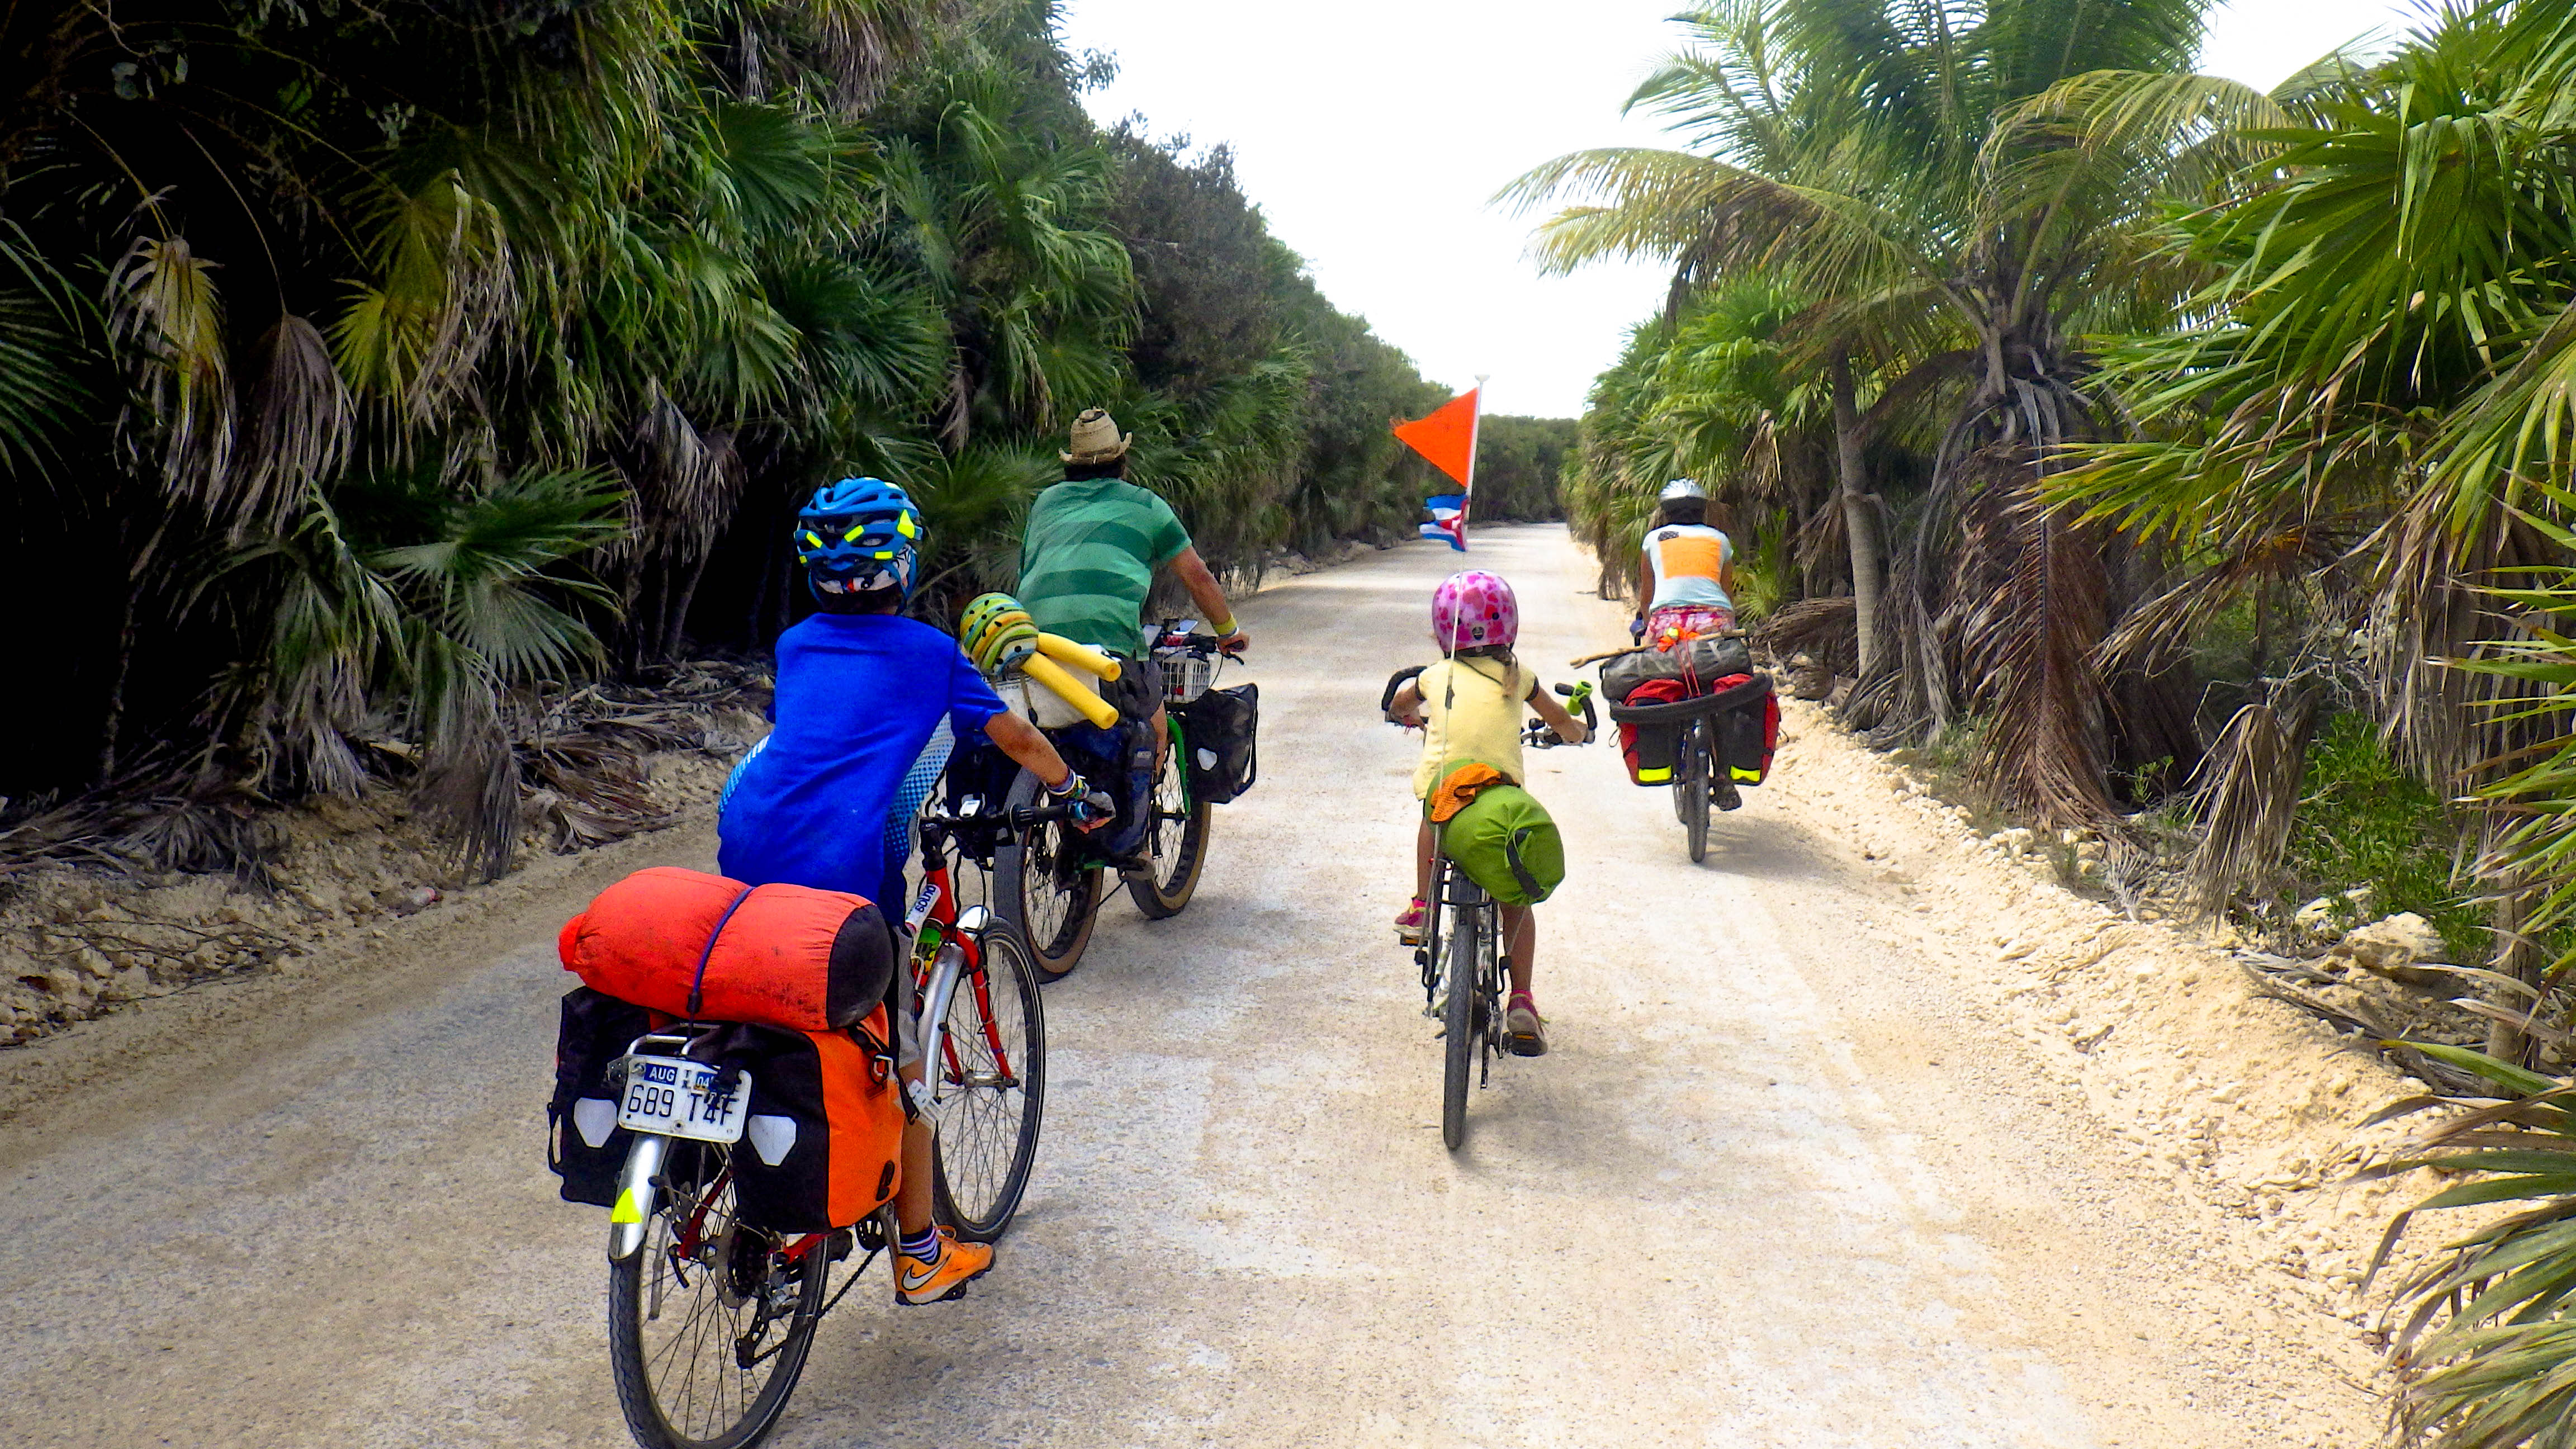 A traveling family cycles on a dirt road surrounded by tropical plants, showing parents who share their wanderlust with their kids. (image © Eva Boynton)